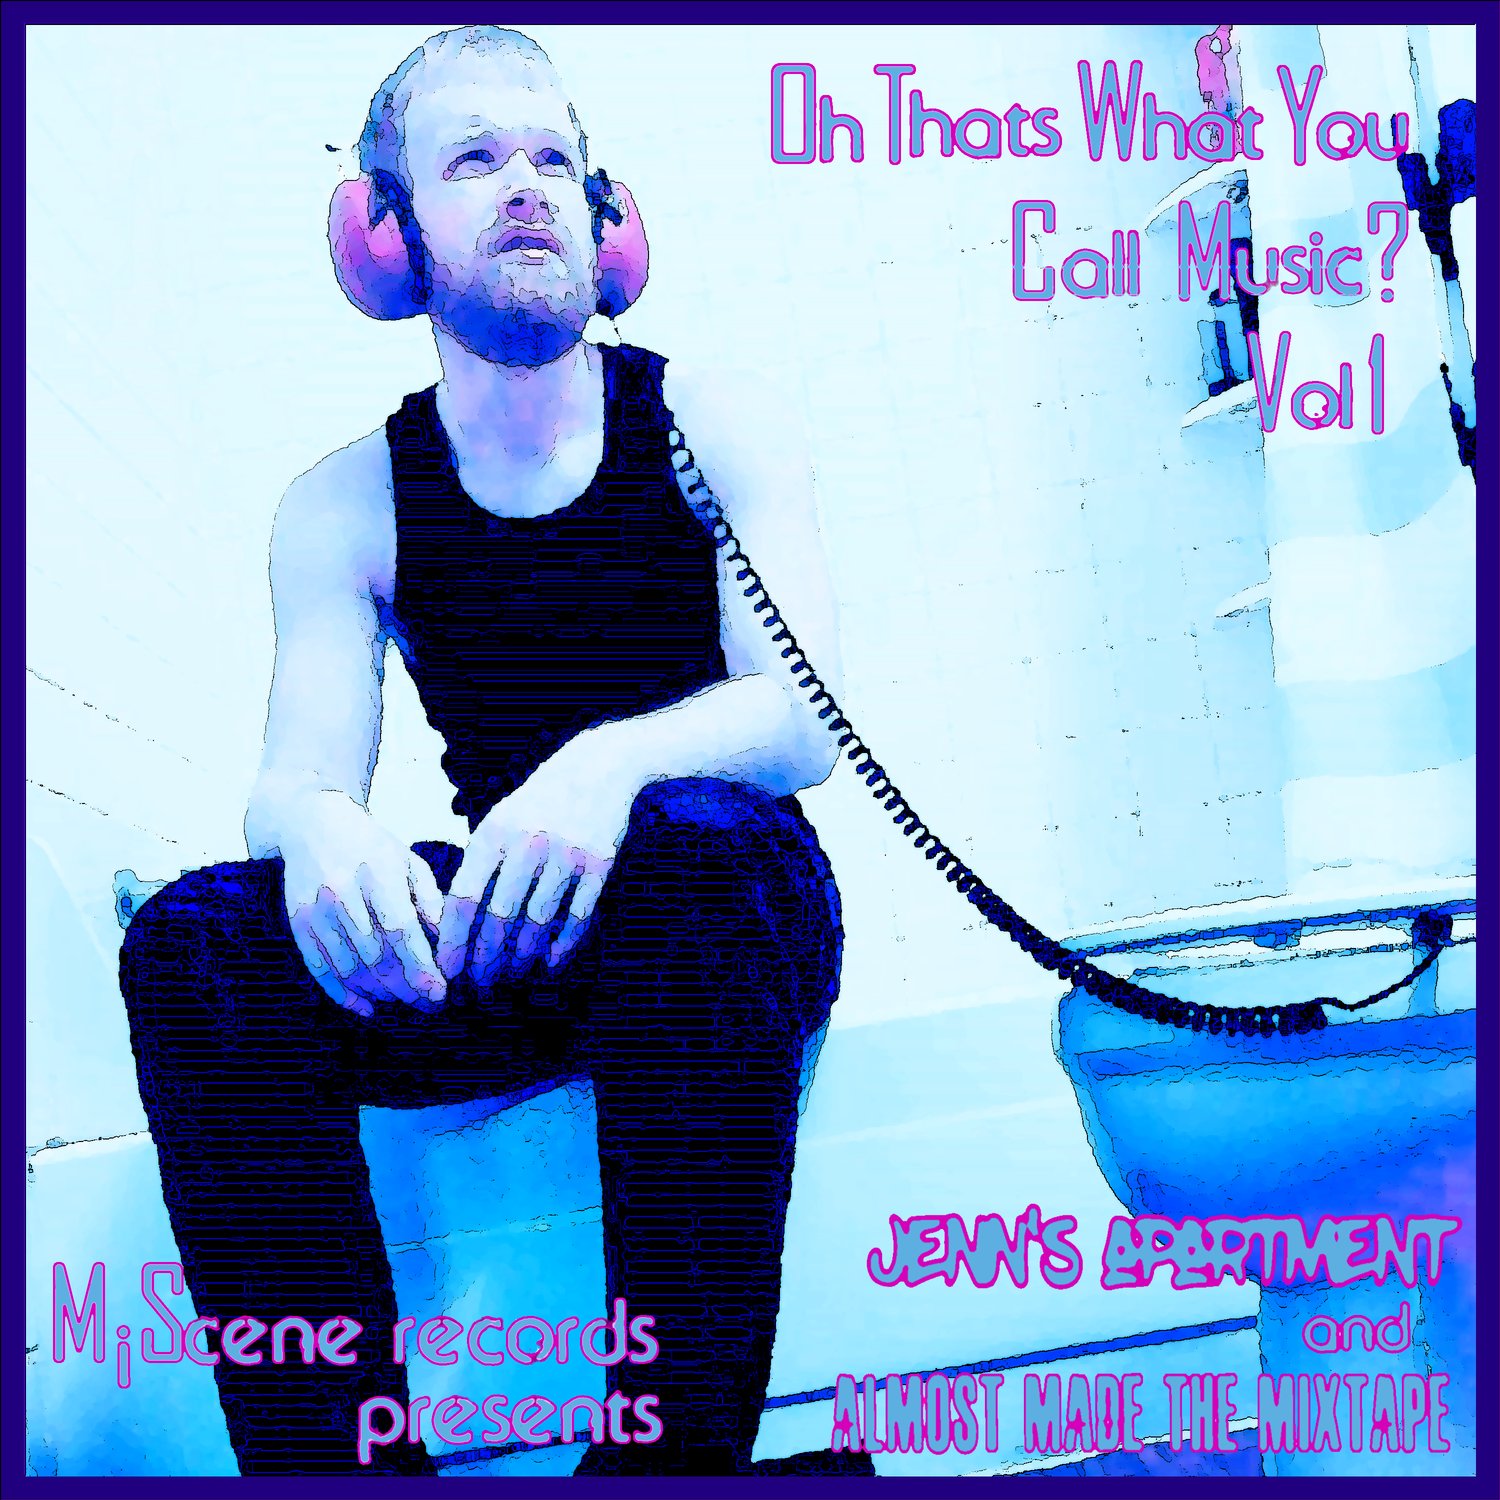 Album art for “Oh! That’s What You Call Music?! Volume 1,” which features tracks from Jenn’s Apartment and Almost Made The Mixtape.